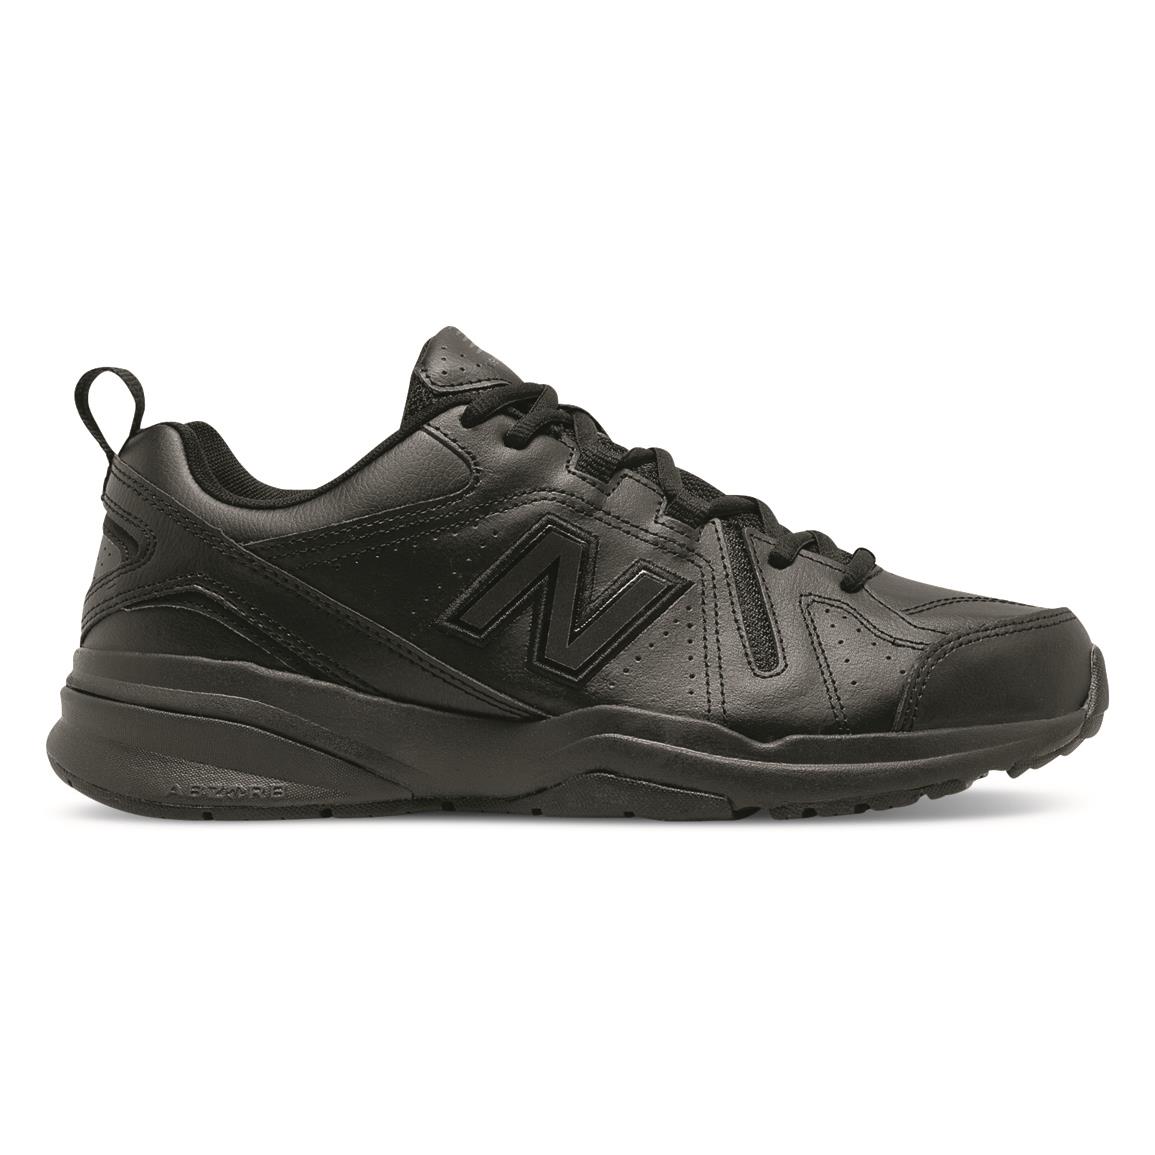 New Balance Men's 608v5 Athletic Shoes - 719791, Running Shoes ...